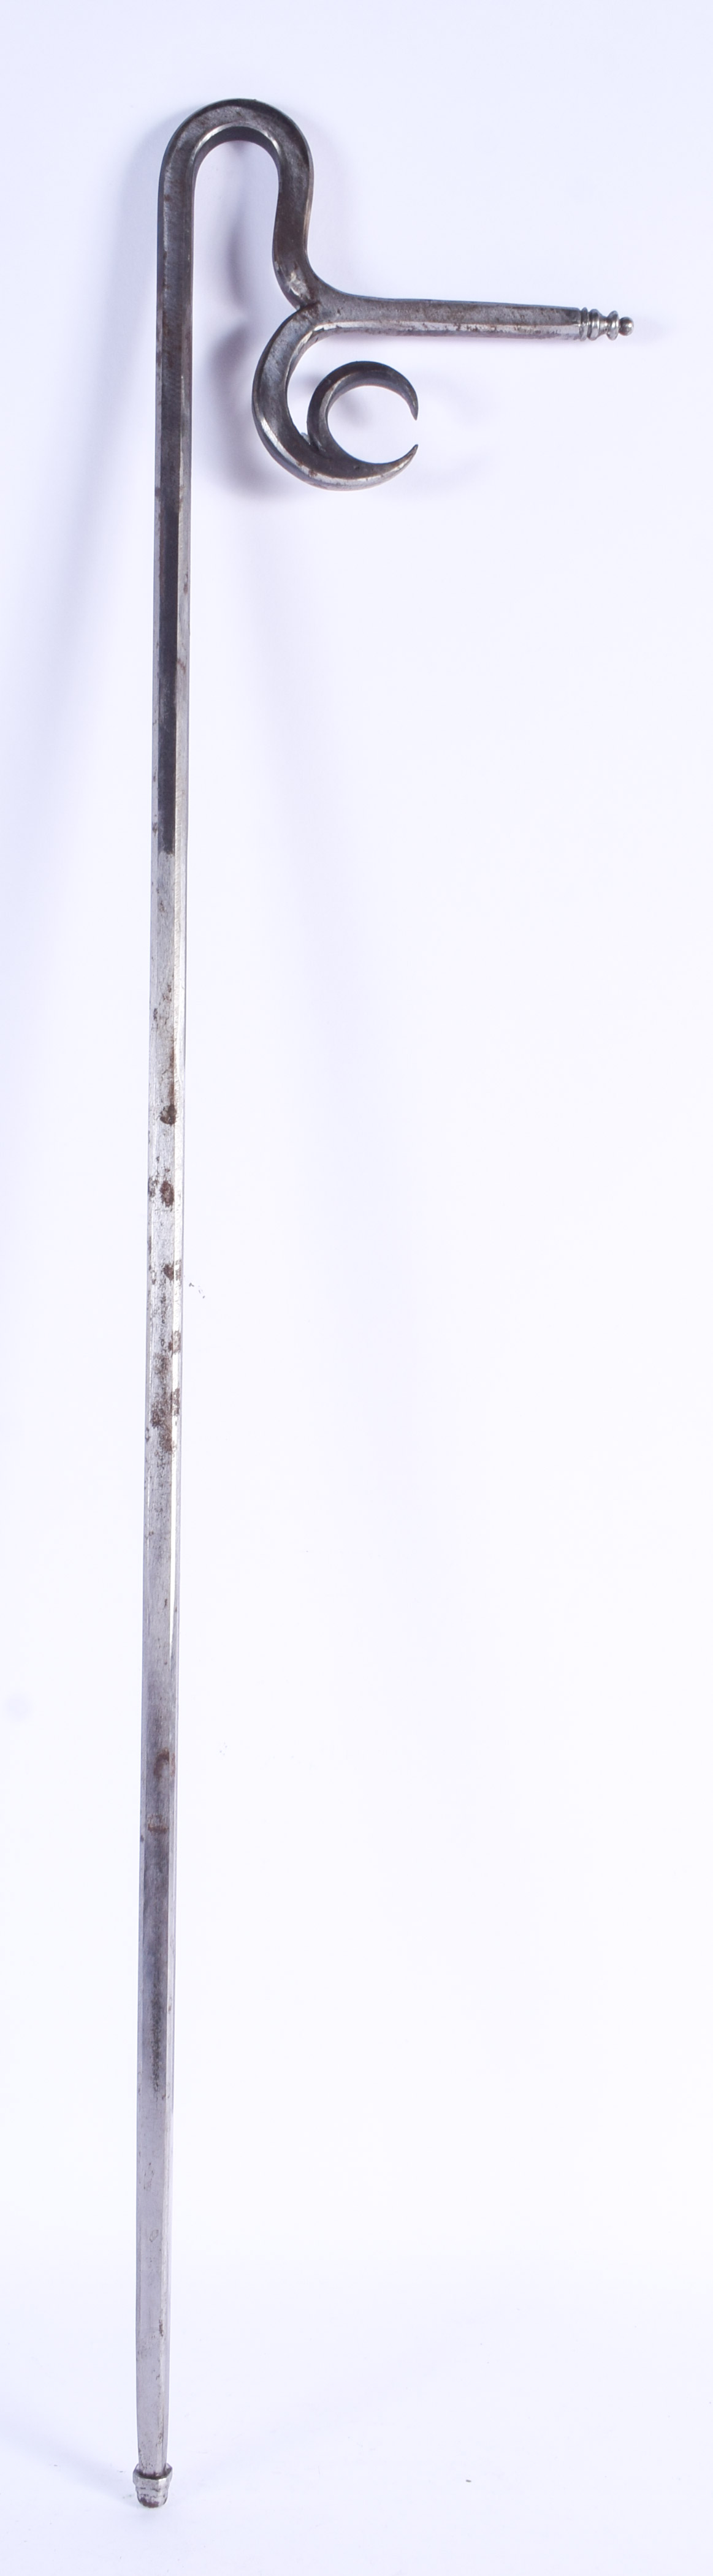 AN UNUSUAL MIDDLE EASTERN ISLAMIC ONE PIECE STEEL STICK. 70 cm long. - Image 2 of 2